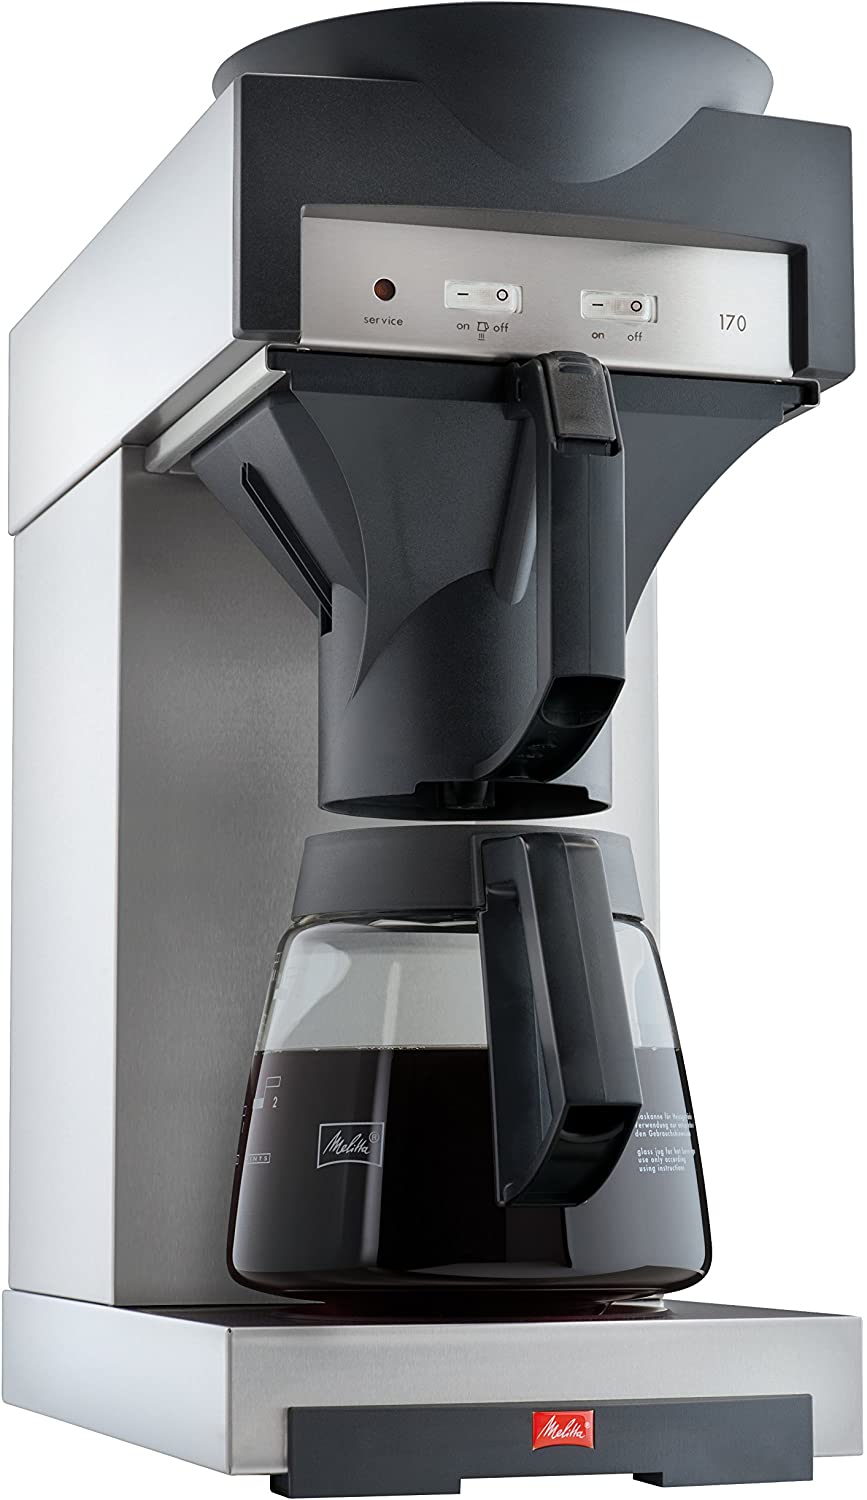 Melitta Professional Melitta 20348 Filter Coffee Maker with Glass Jug, 1.8 L, Warming Plate, 17 M, Stainless Steel/Black